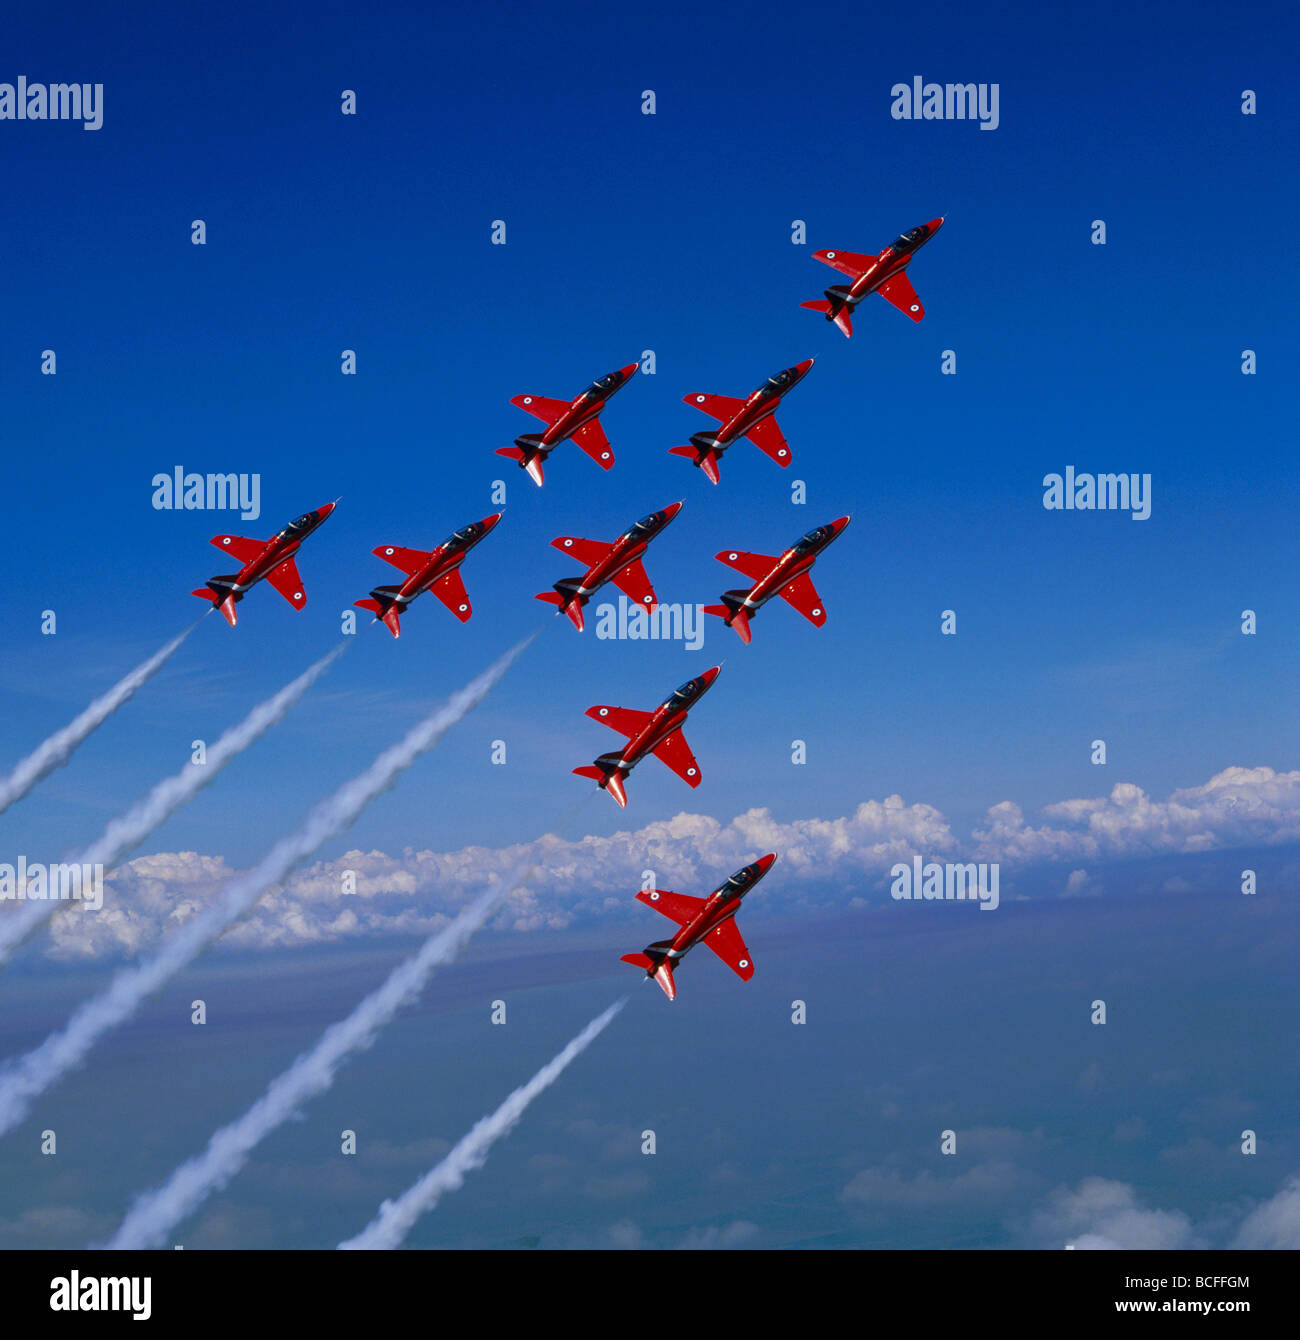 Red Arrows 2 RAF Aerobatic Team Formation Photo Sky Action Shot Poster Photo